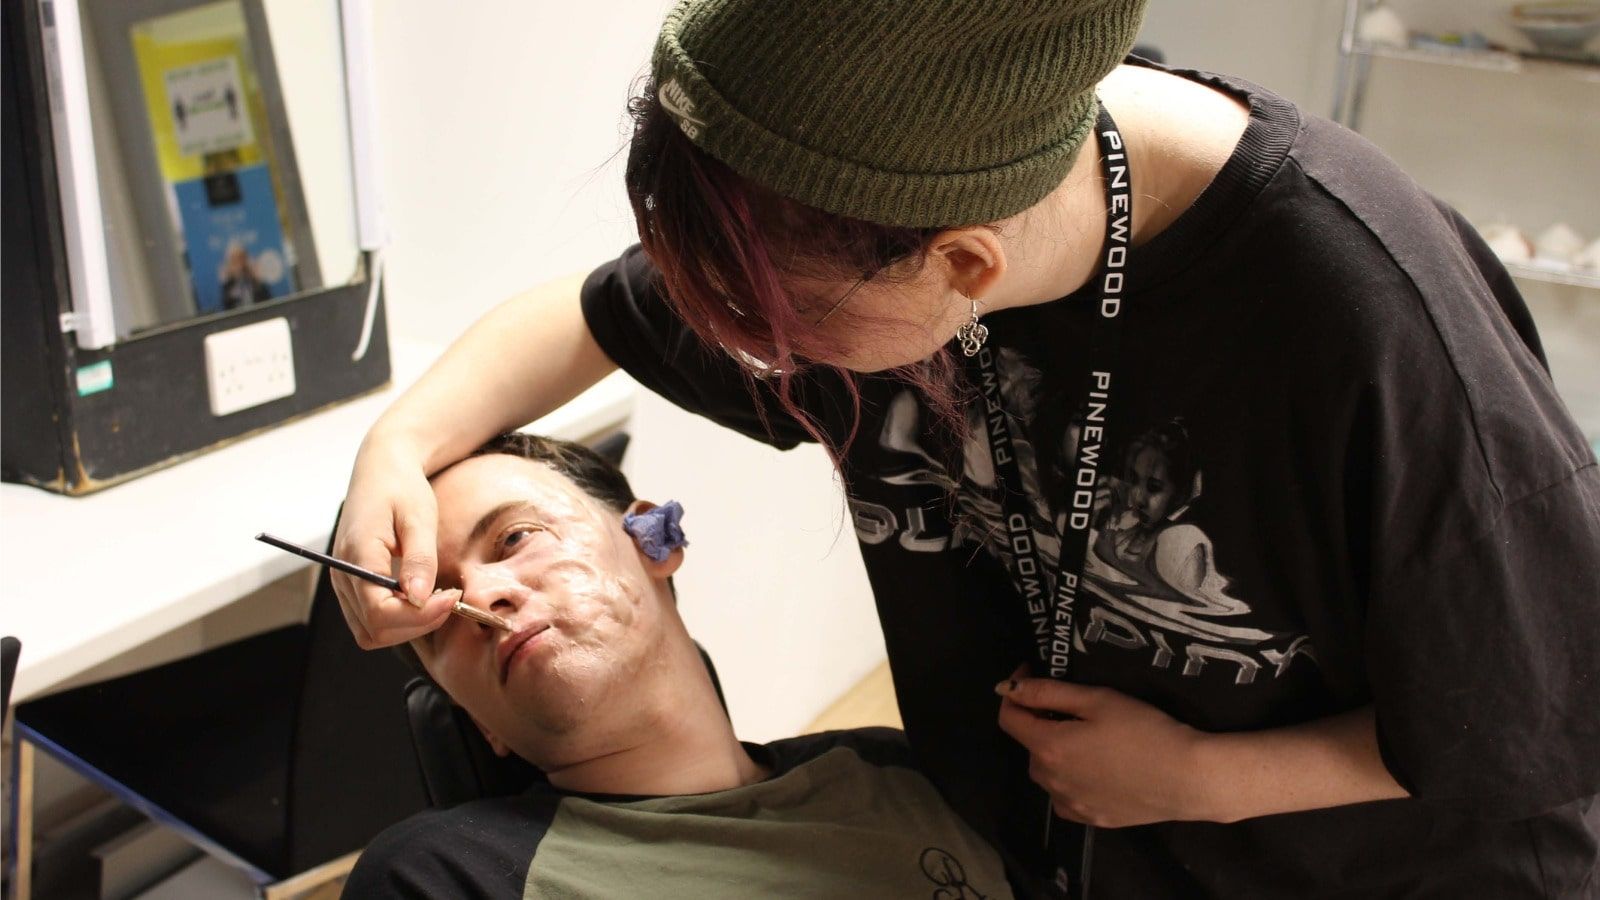 A special effects student applies a mask to a student lying down.